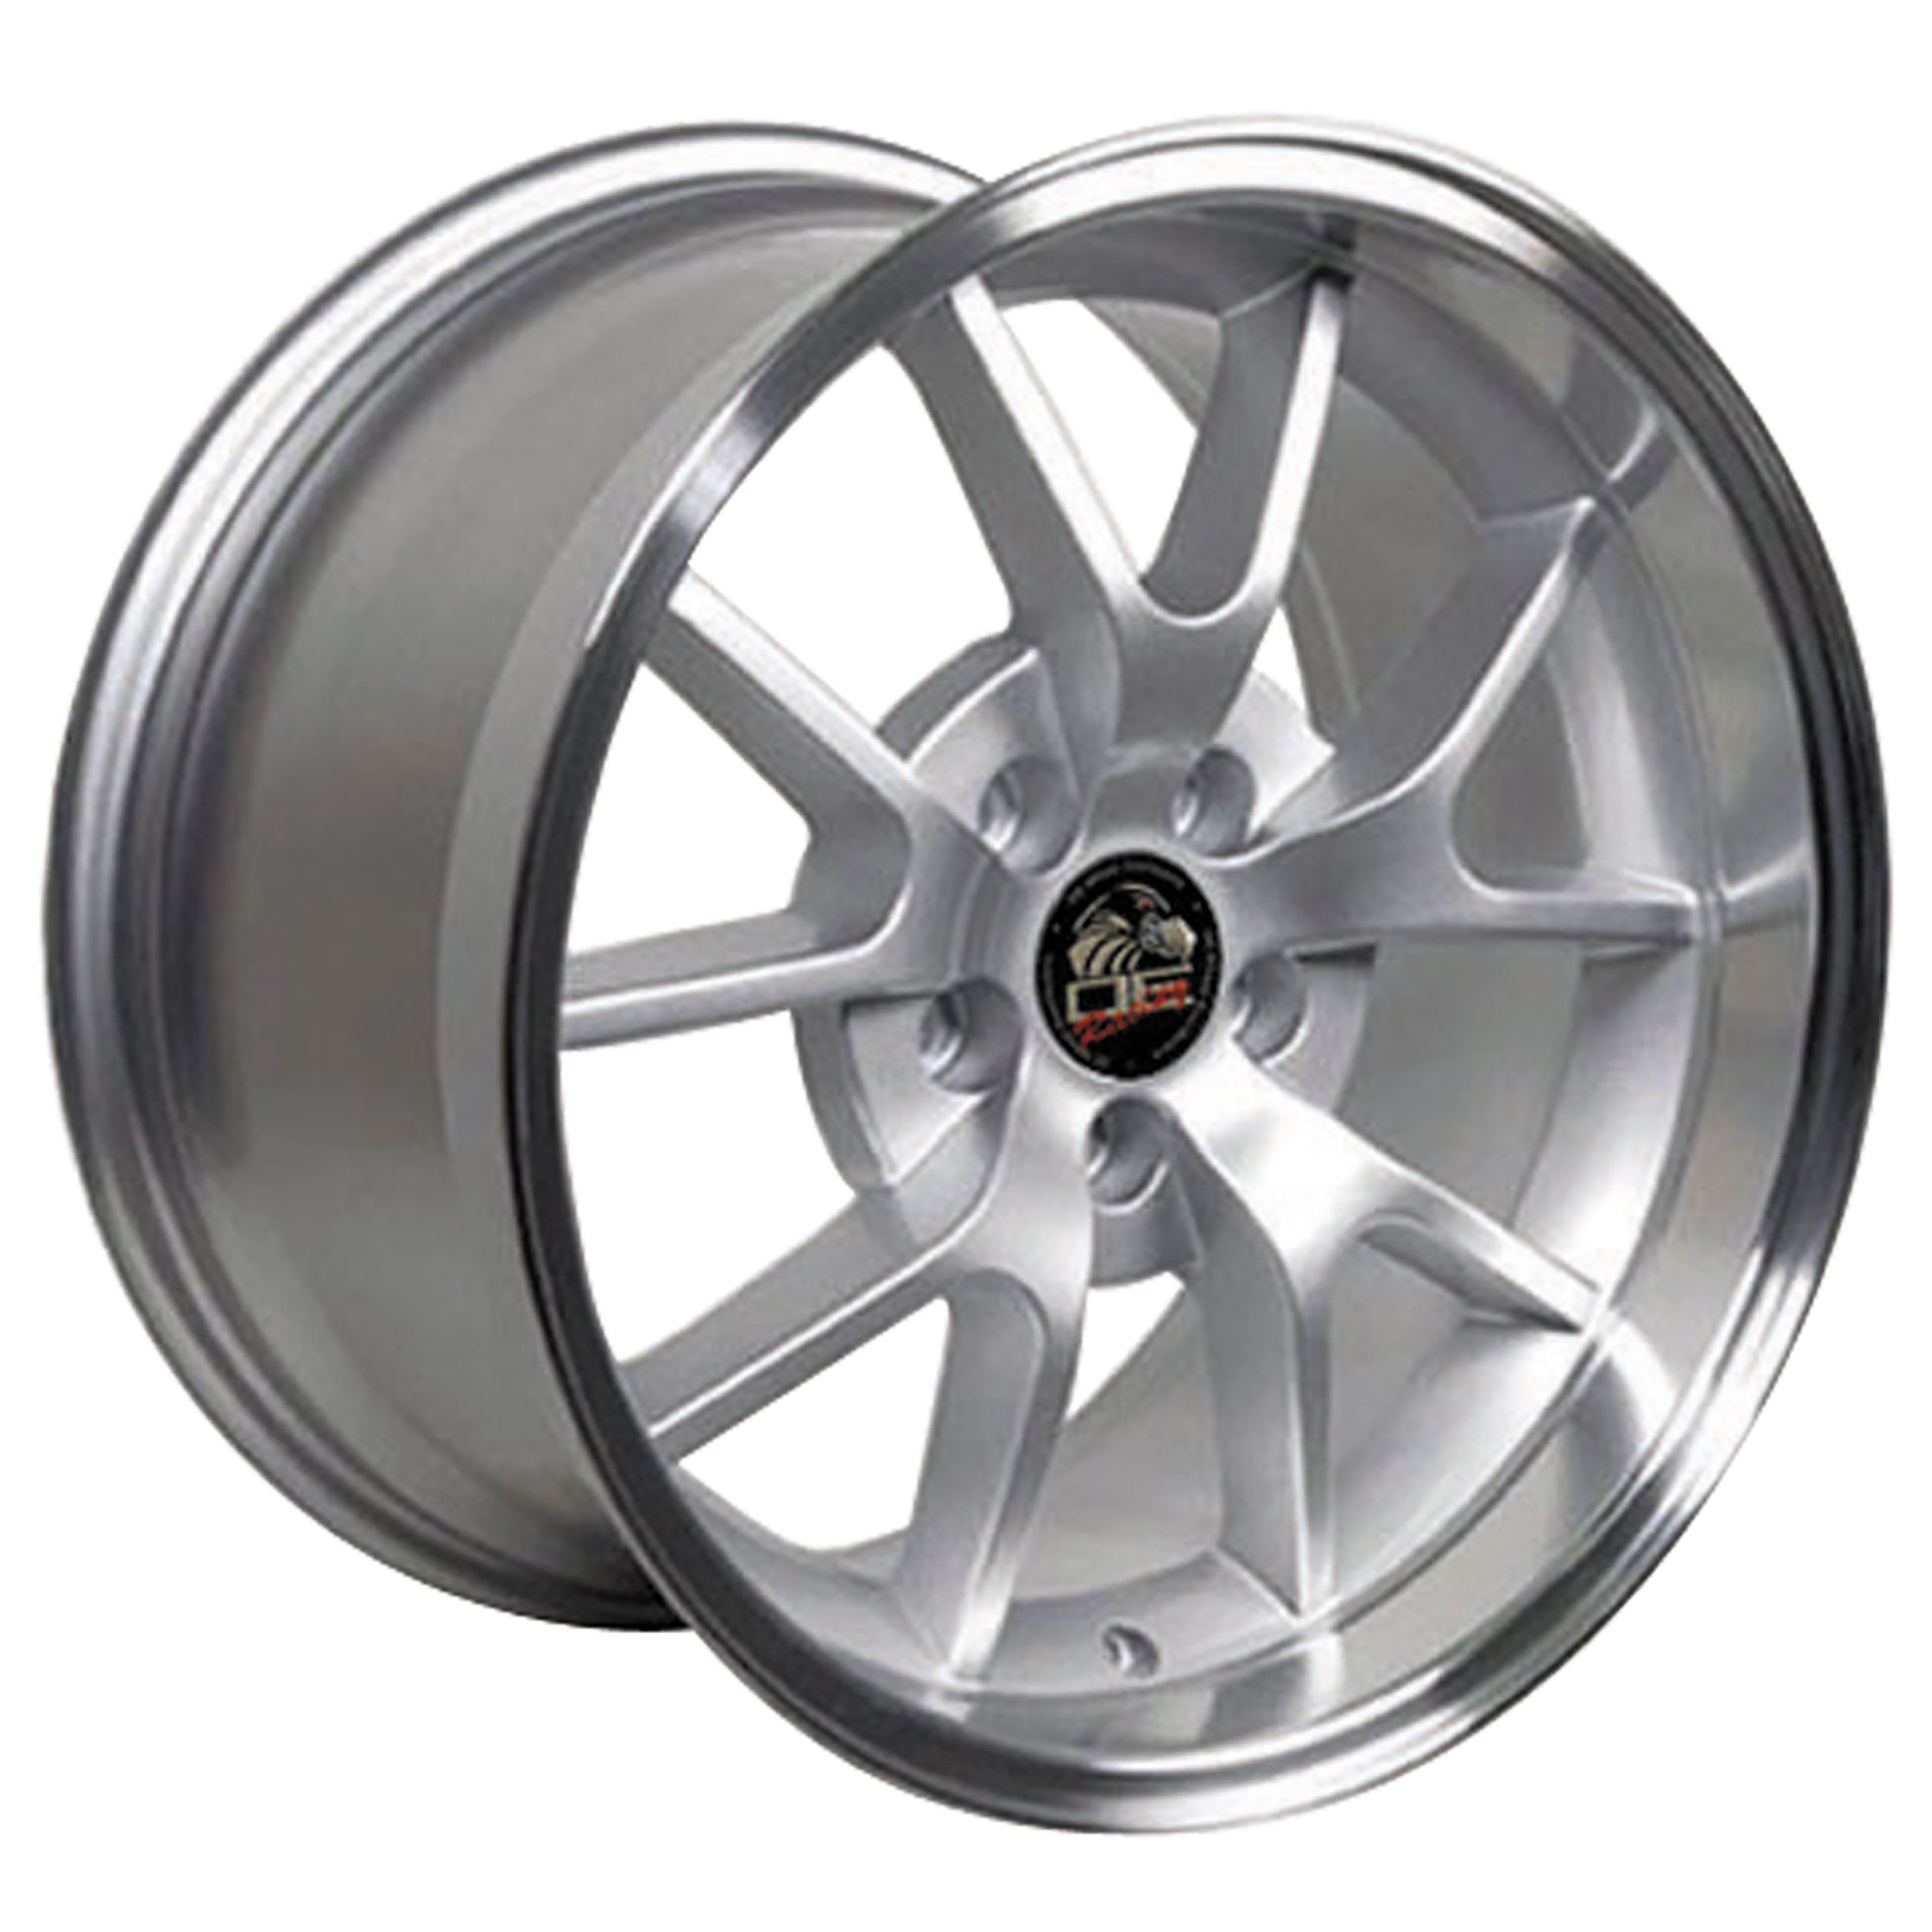 1994-2004 Mustang C4-C5 FR500 Wheel Silver Machined Lip 18x10 Rears Only CA-MA23036 